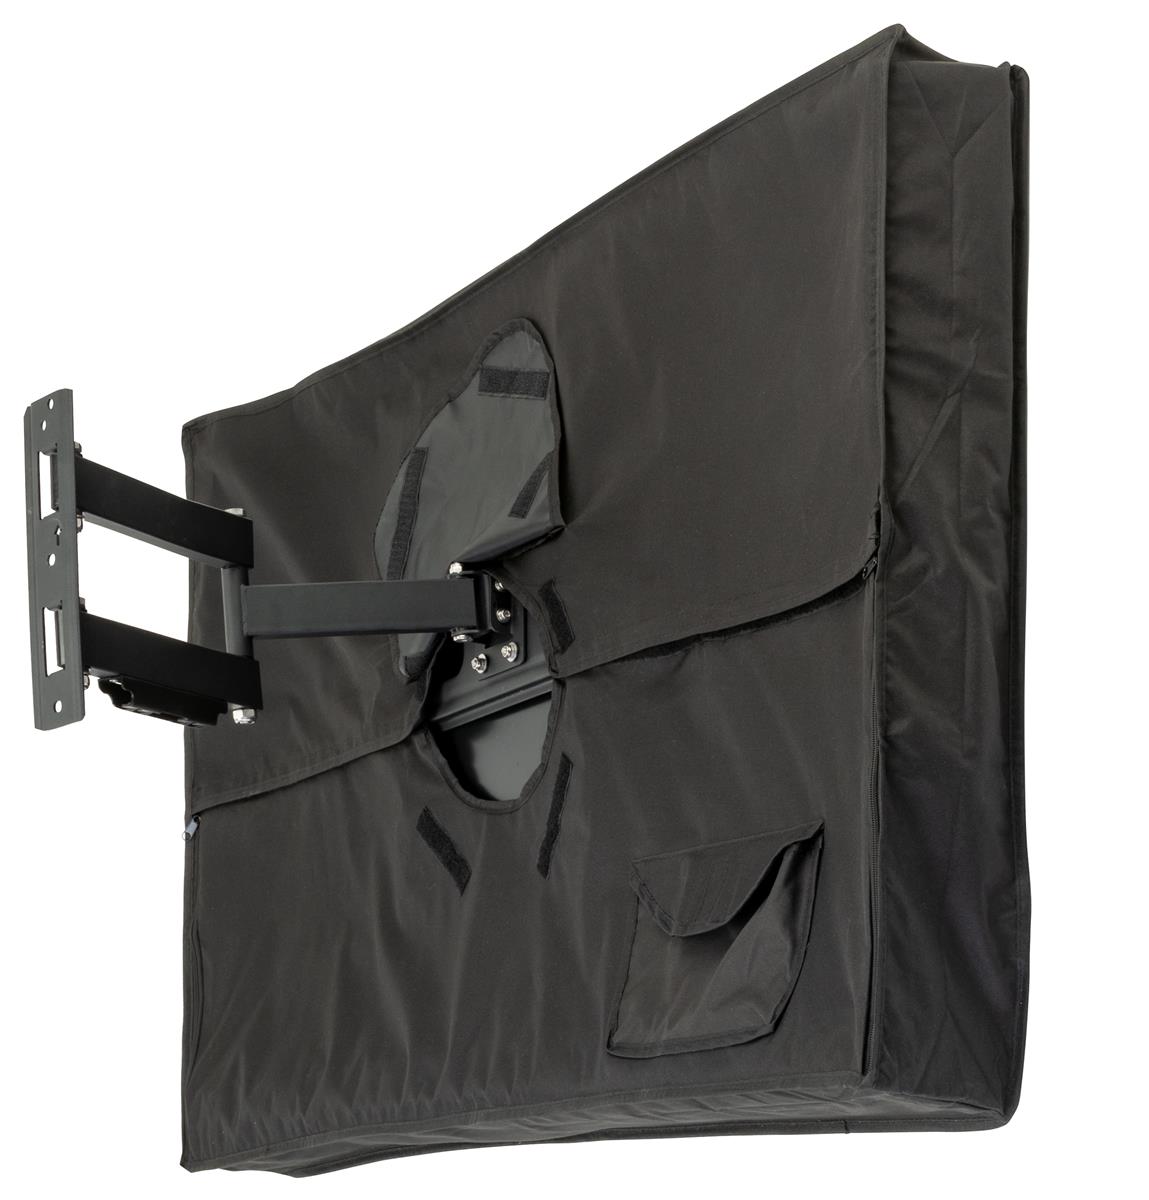 Outdoor Cover For Tv Protects 55, Outdoor Tv Cover 55